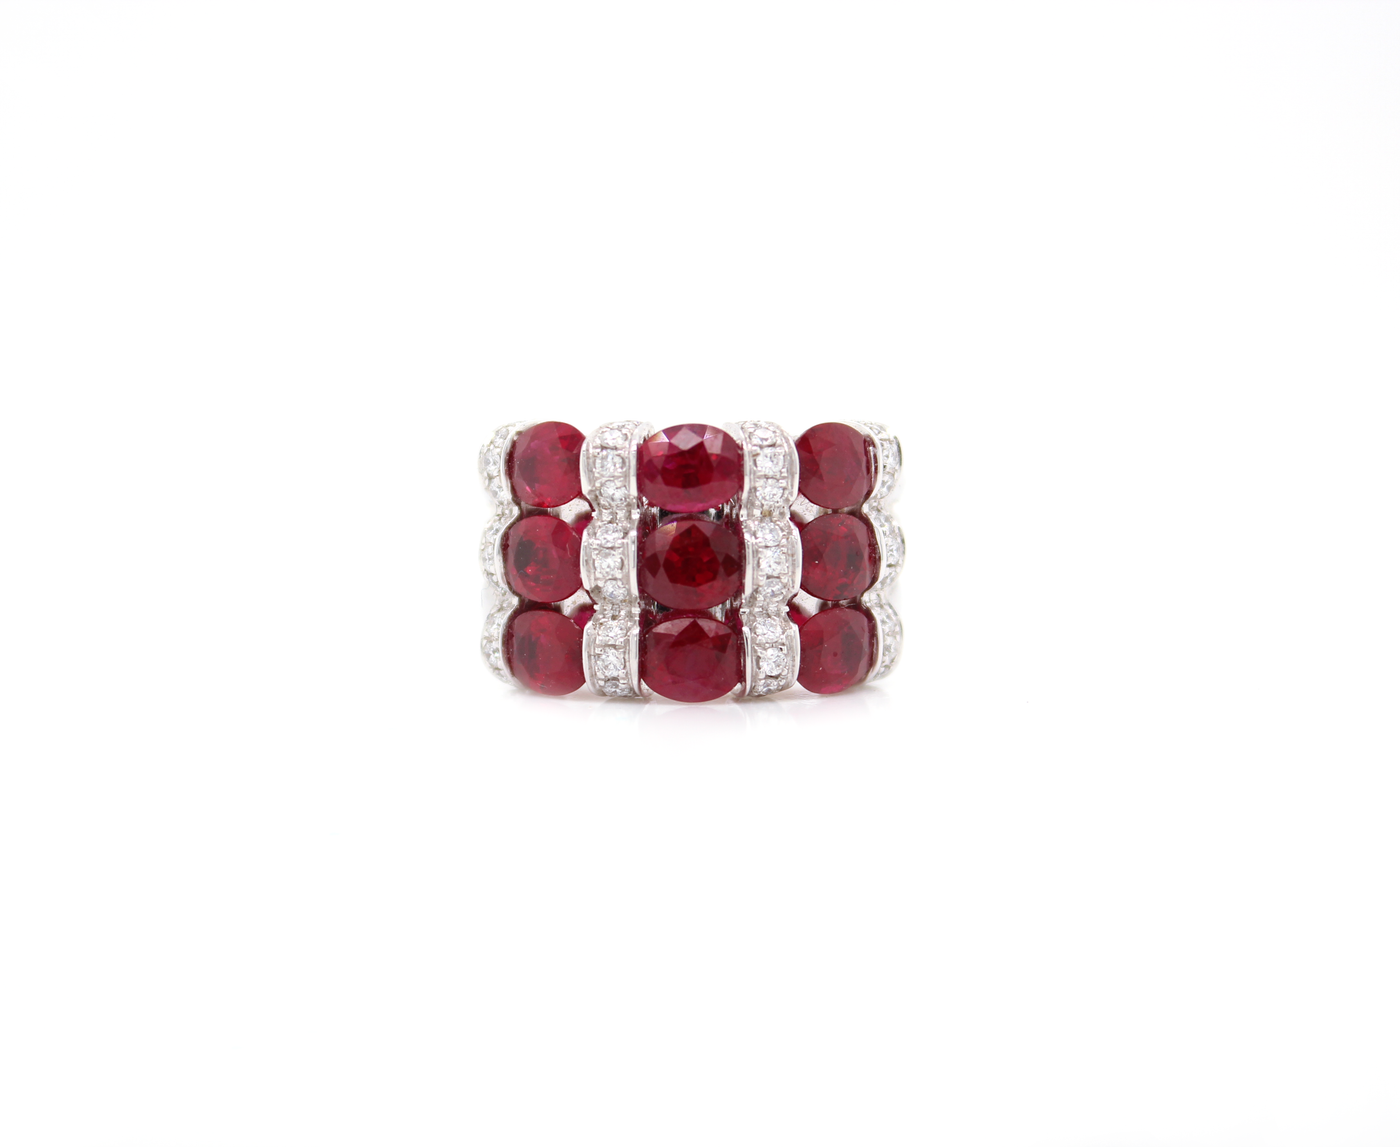 4.50ct Oval Cut Ruby and Diamond Wide Band Ring